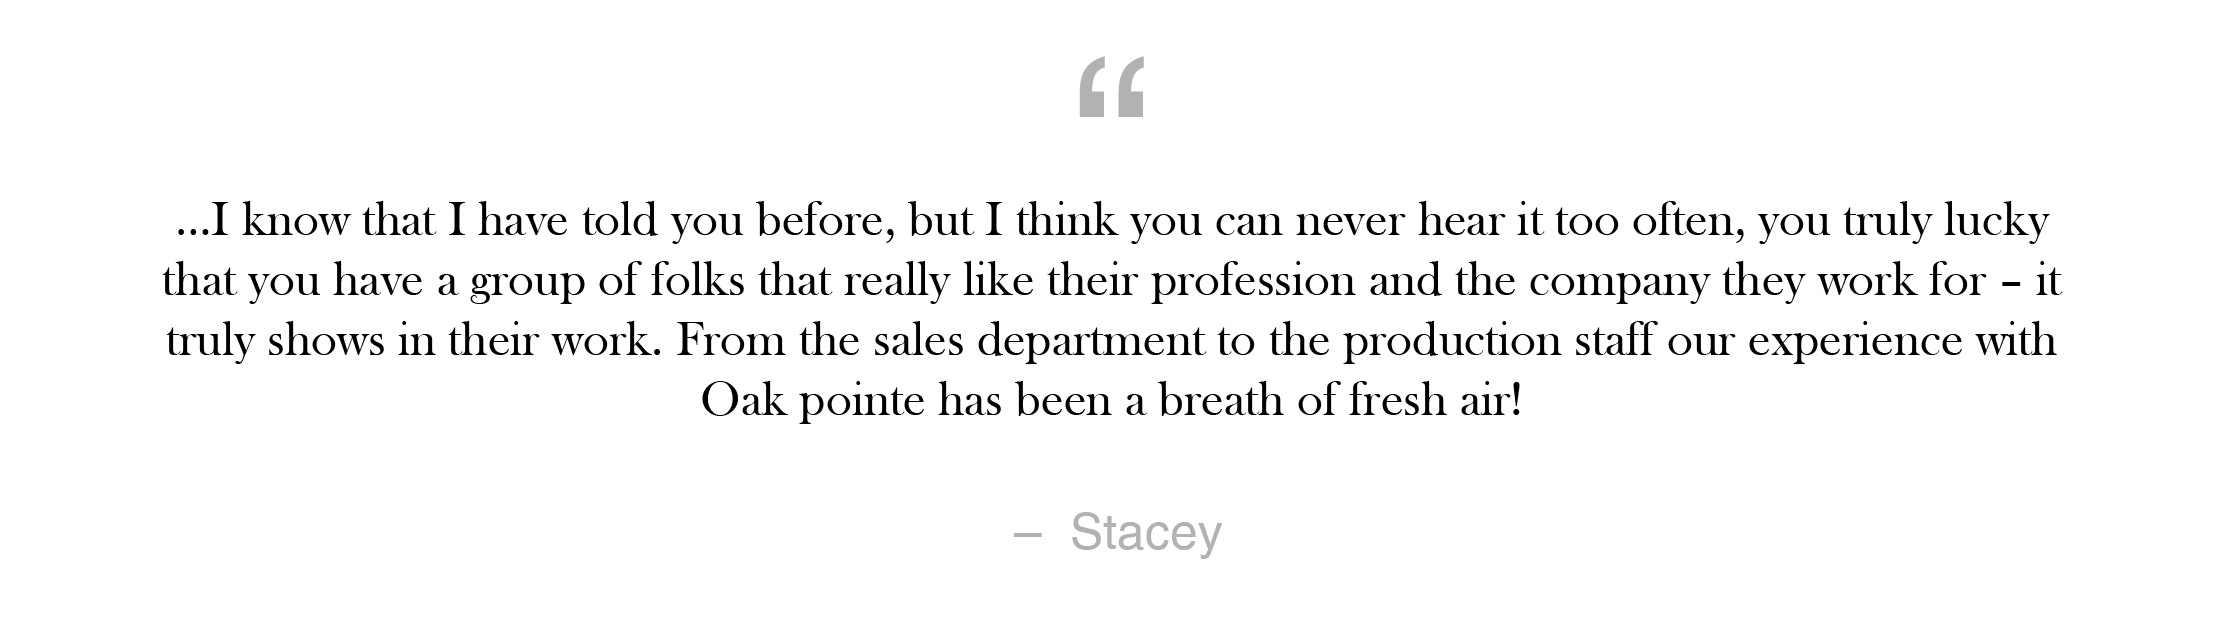 Quote#2_Stacey-01.png